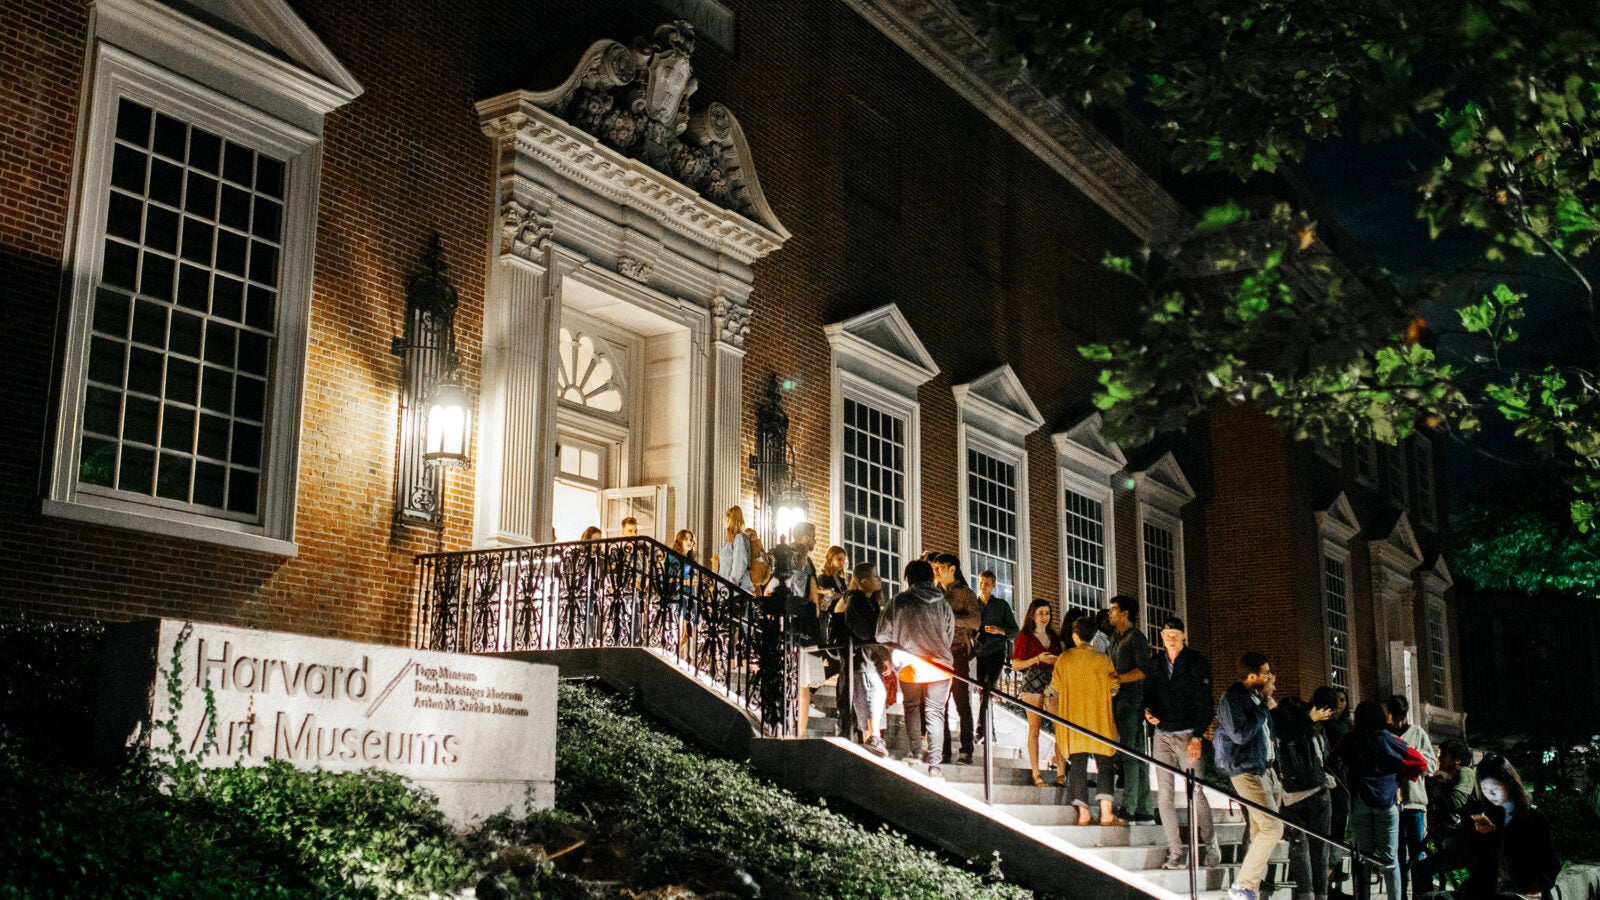 Harvard Art Museums' Student Late Night brought more than 1,200 attendees through its doors.